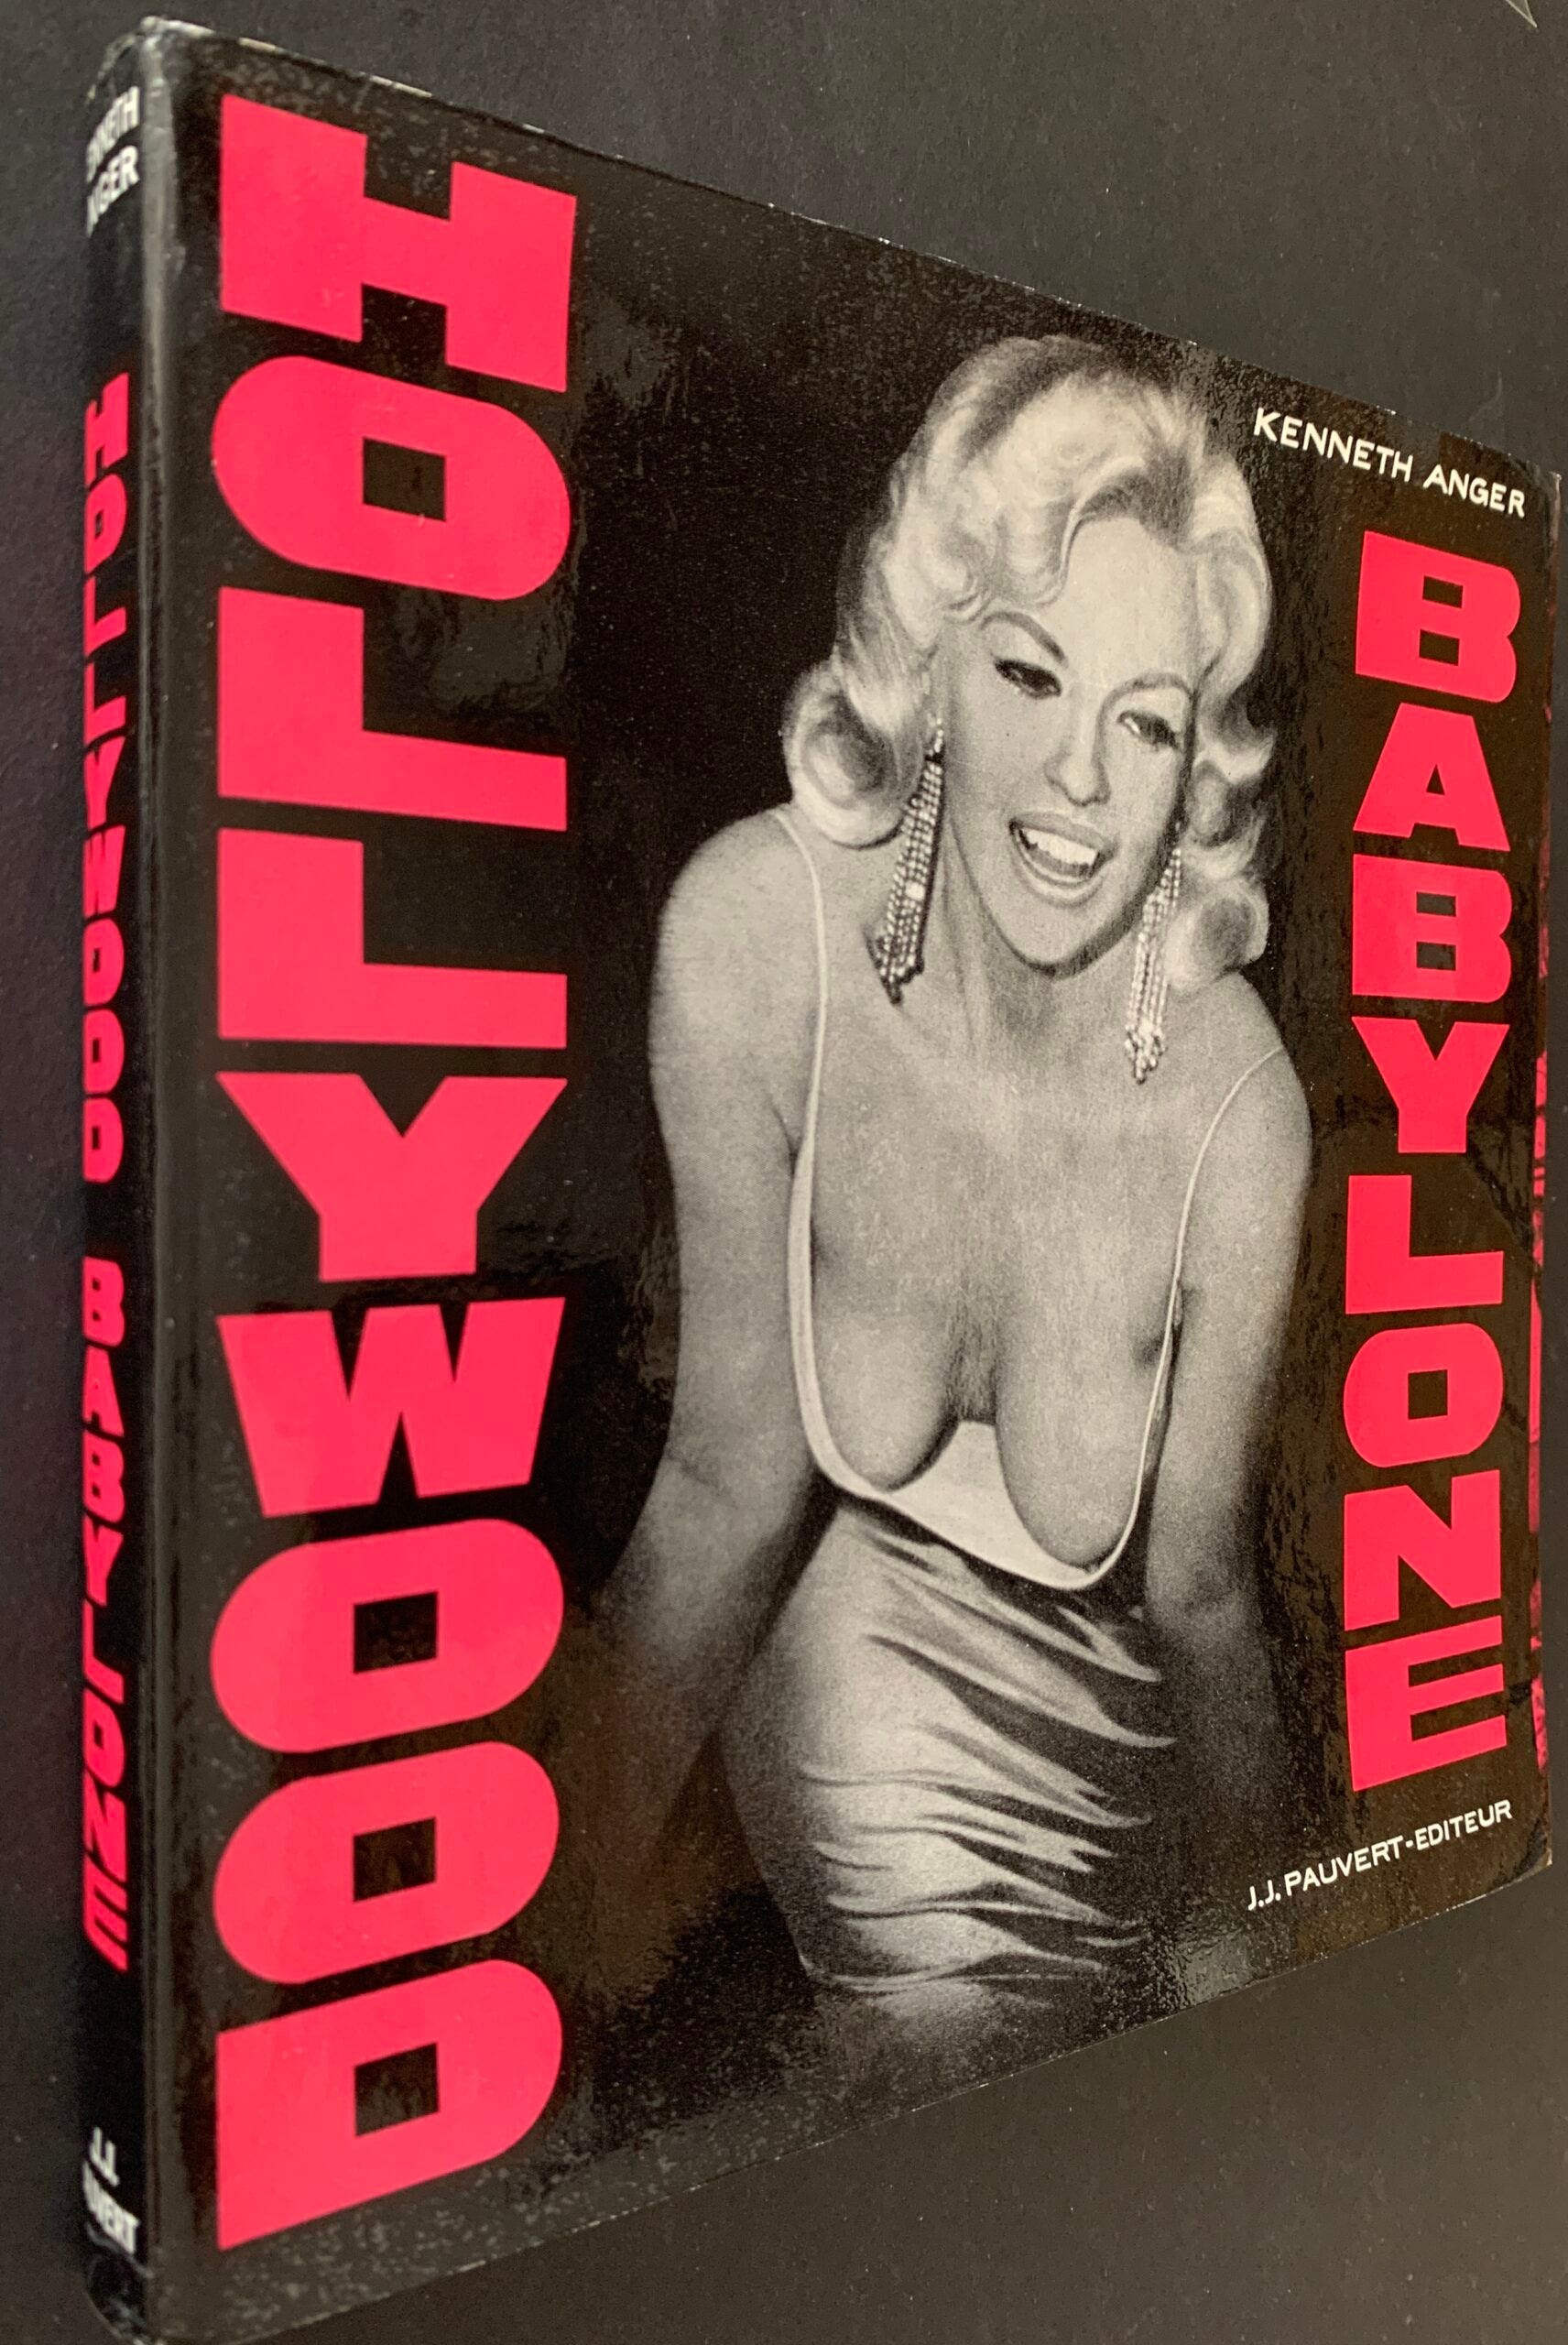 Kenneth Anger, Hollywood Babylone, First French J.J. Pauvert Paperback Edition (1959)